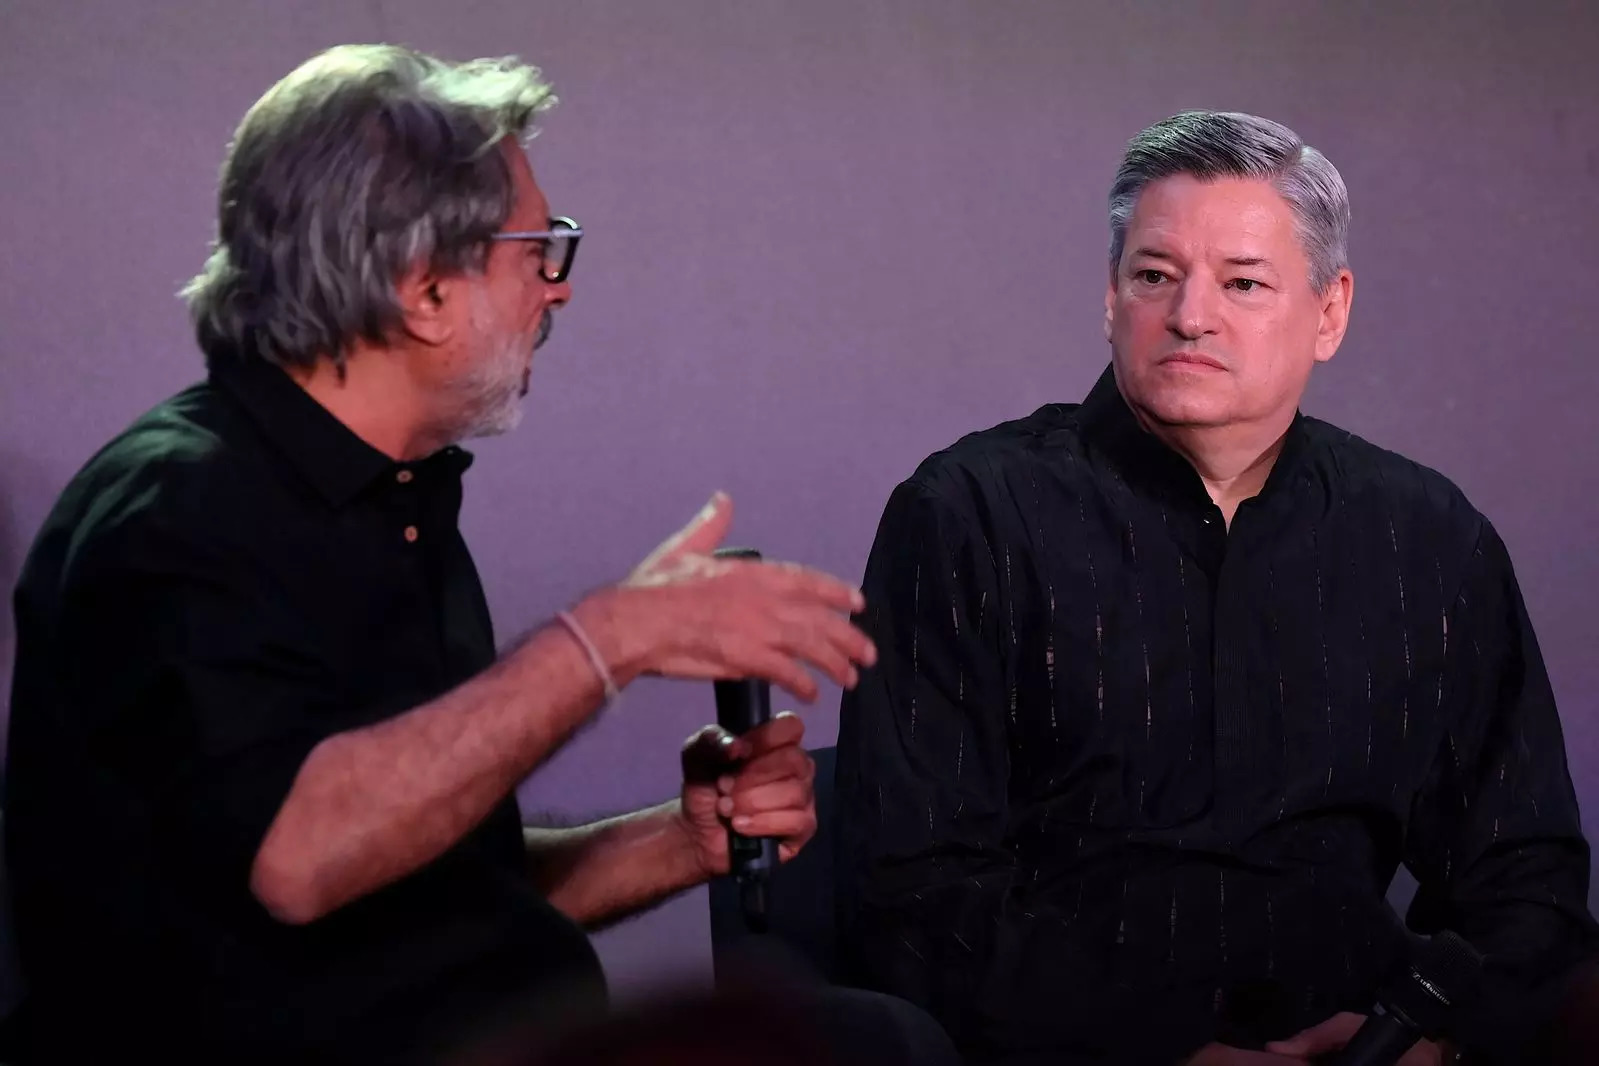 Bollywood director, screenwriter and music composer Sanjay Leela Bhansali (L) along with Co-chief executive officer of Netflix, Ted Sarandos (R) speak during an event in Mumbai on February 18, 2023. (Photo by SUJIT JAISWAL / AFP)